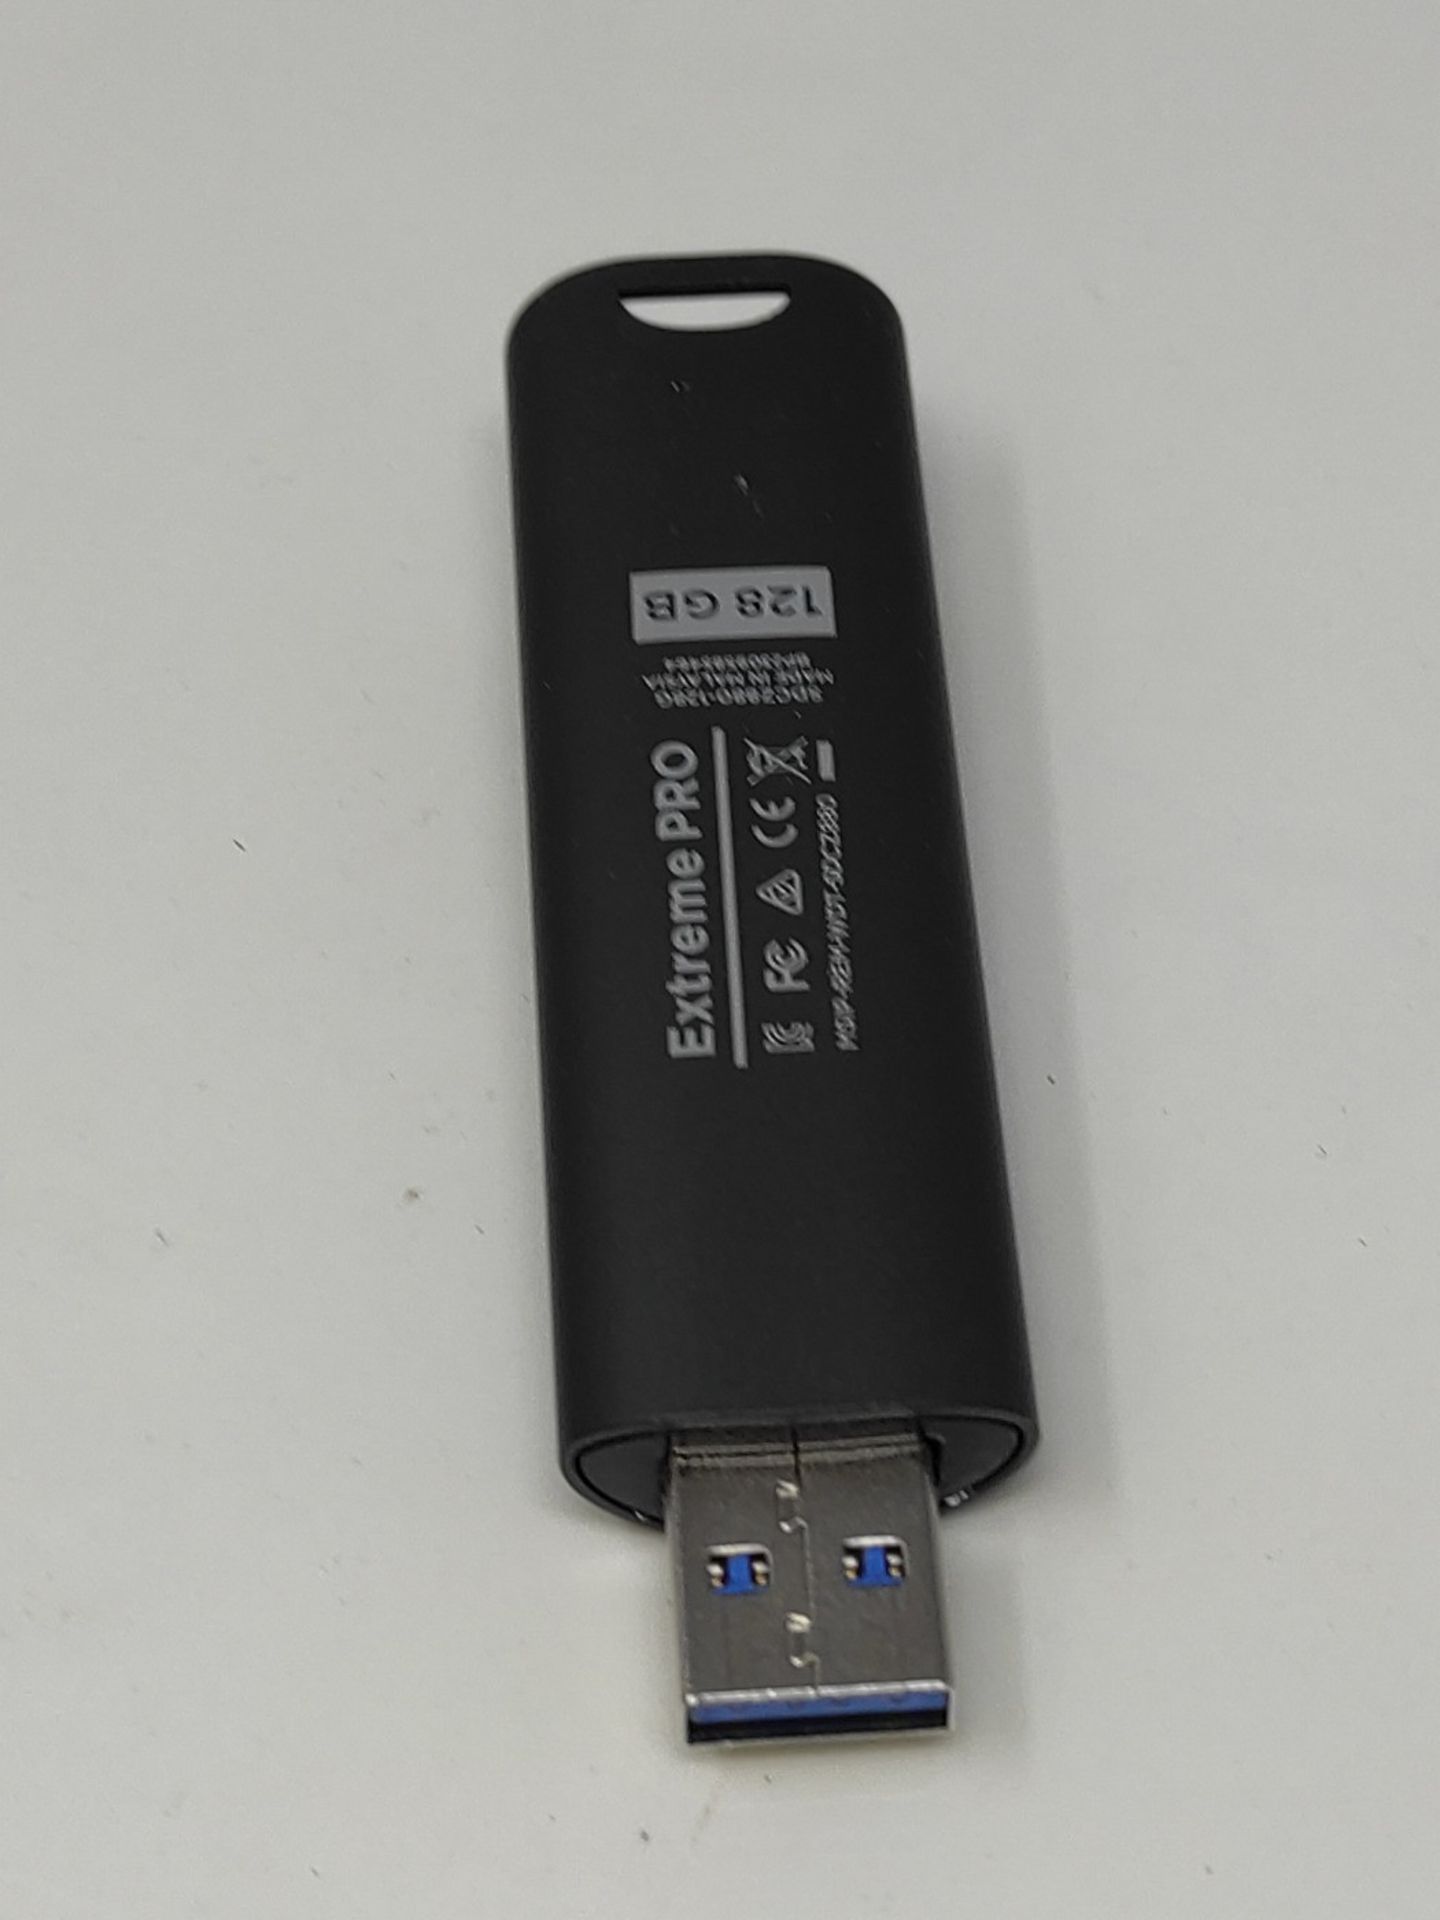 SanDisk Extreme PRO 128GB: a USB 3.2 SSD flash drive with read speeds of up to 420MB/s - Bild 4 aus 4